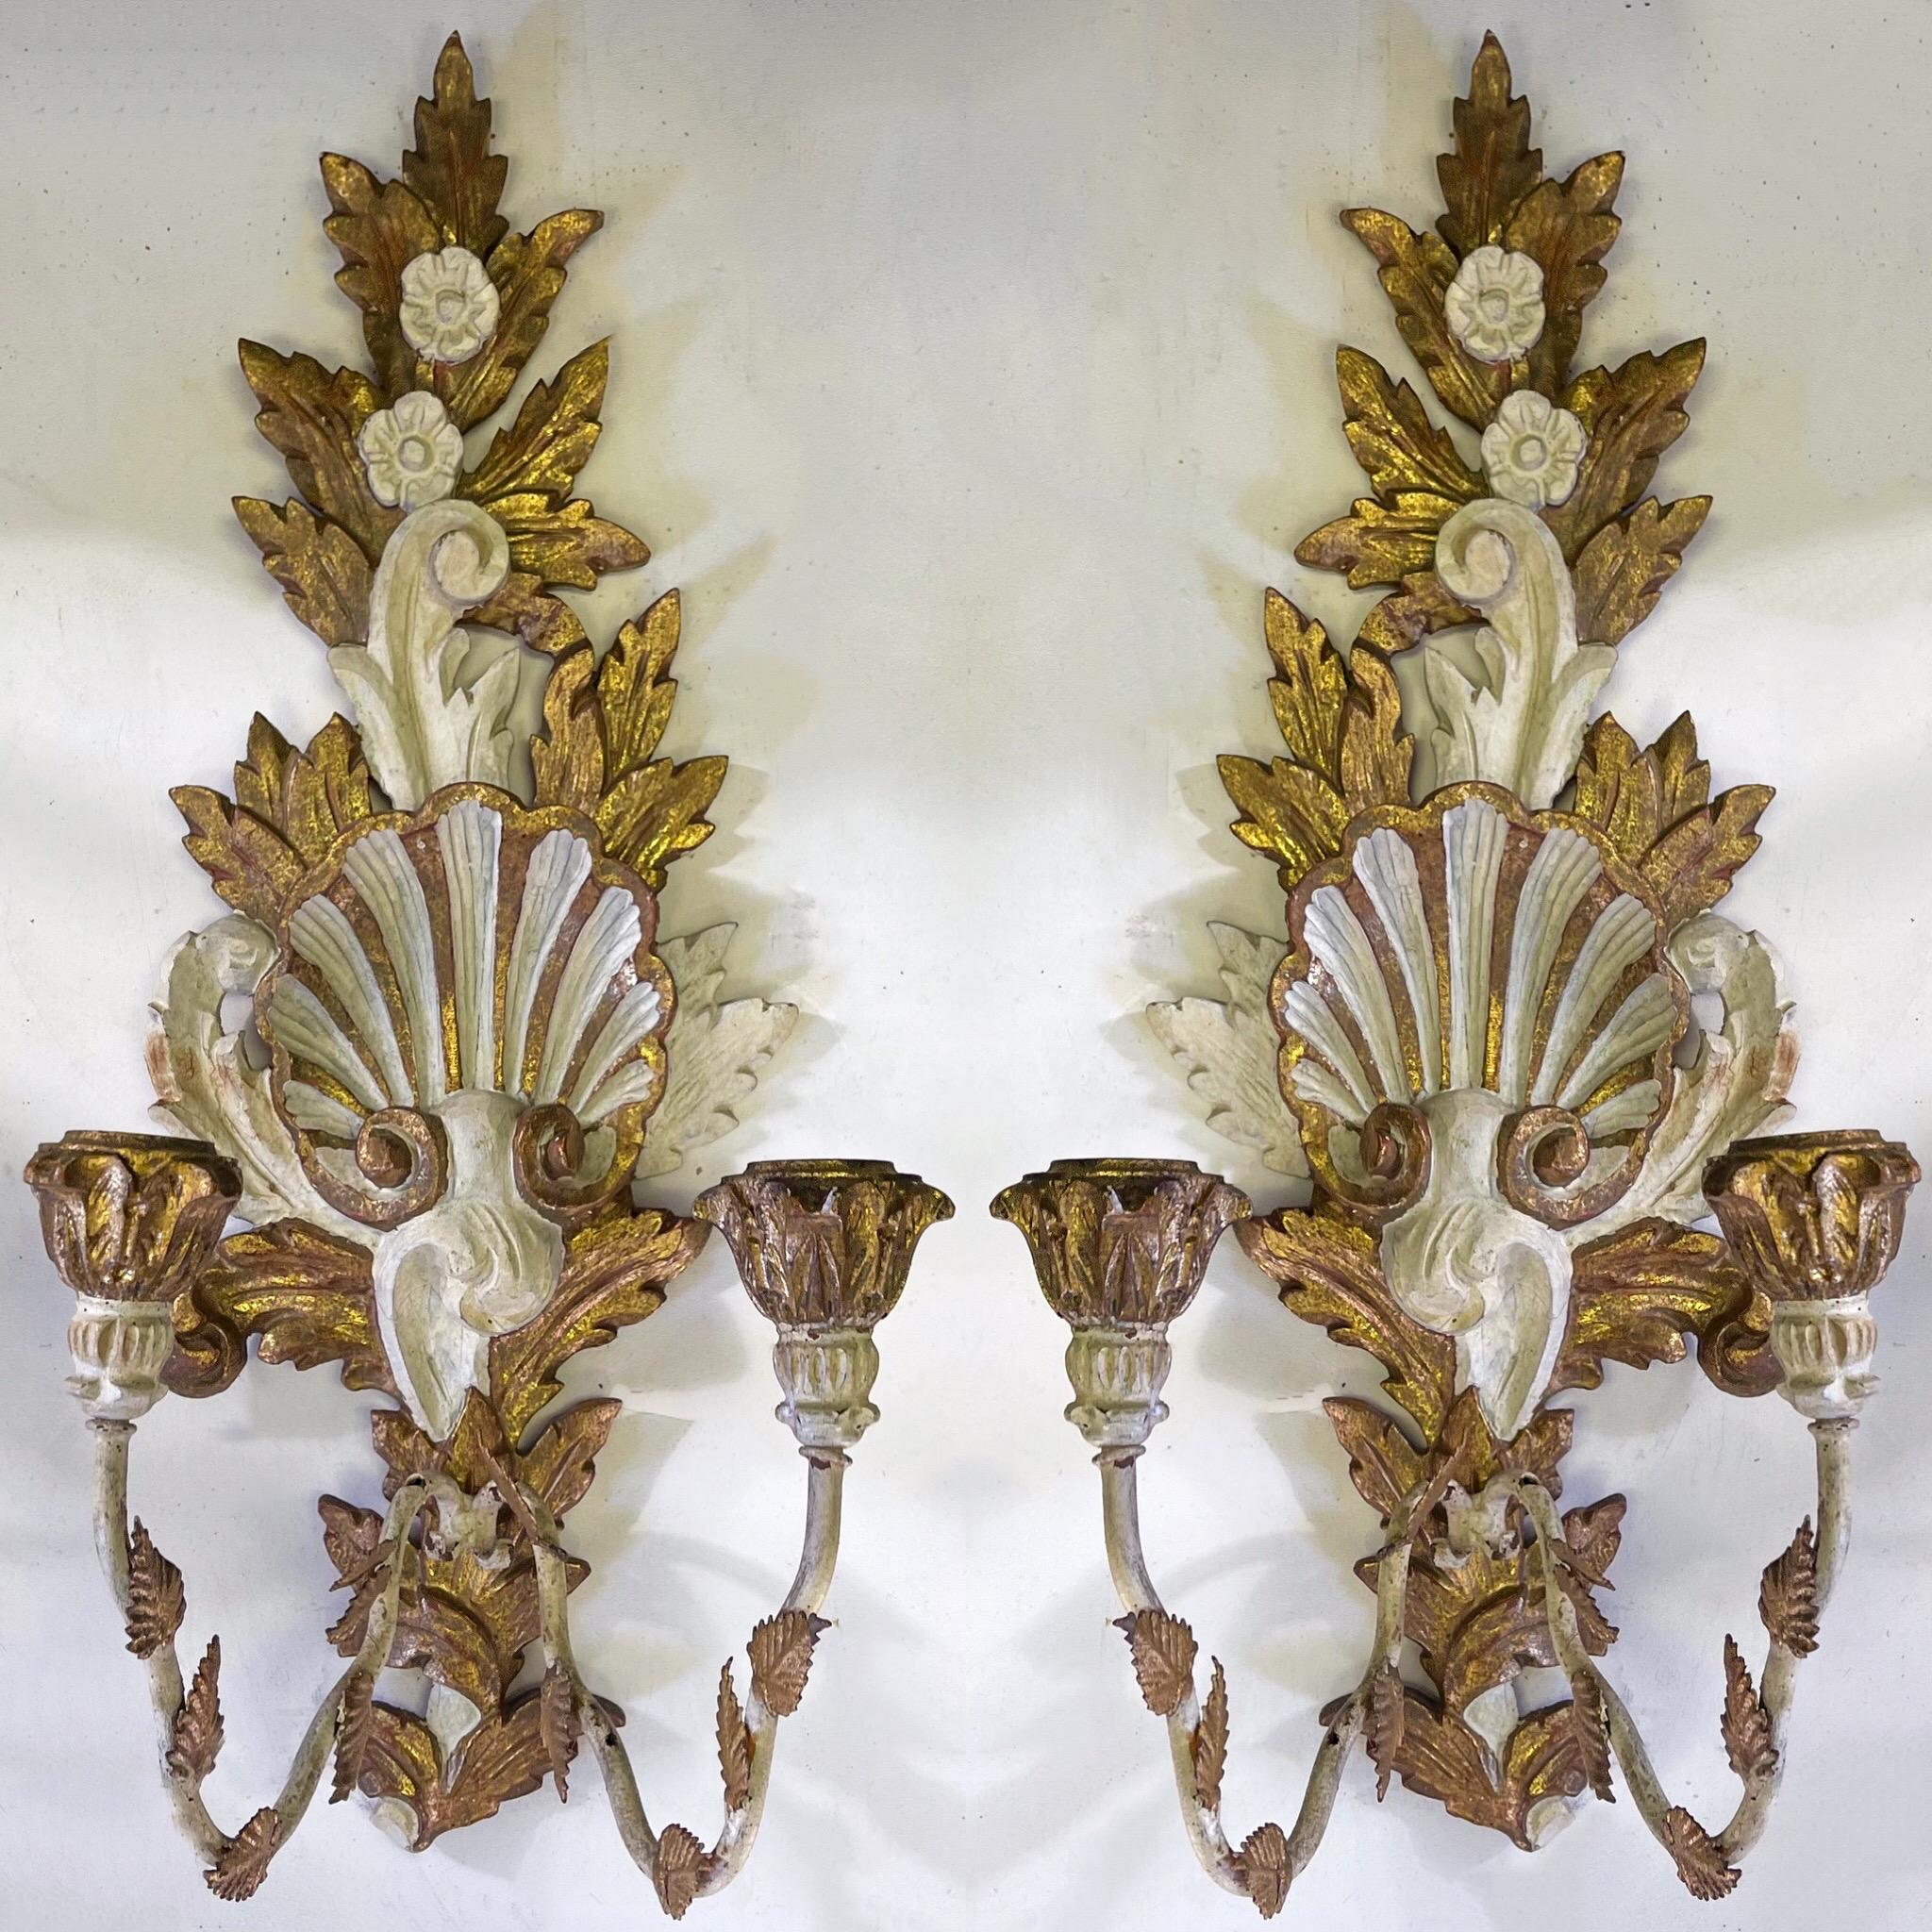 Italian Giltwood And Painted Carved Sconces With Shell And Floral Motif, Pair In Good Condition For Sale In Kennesaw, GA